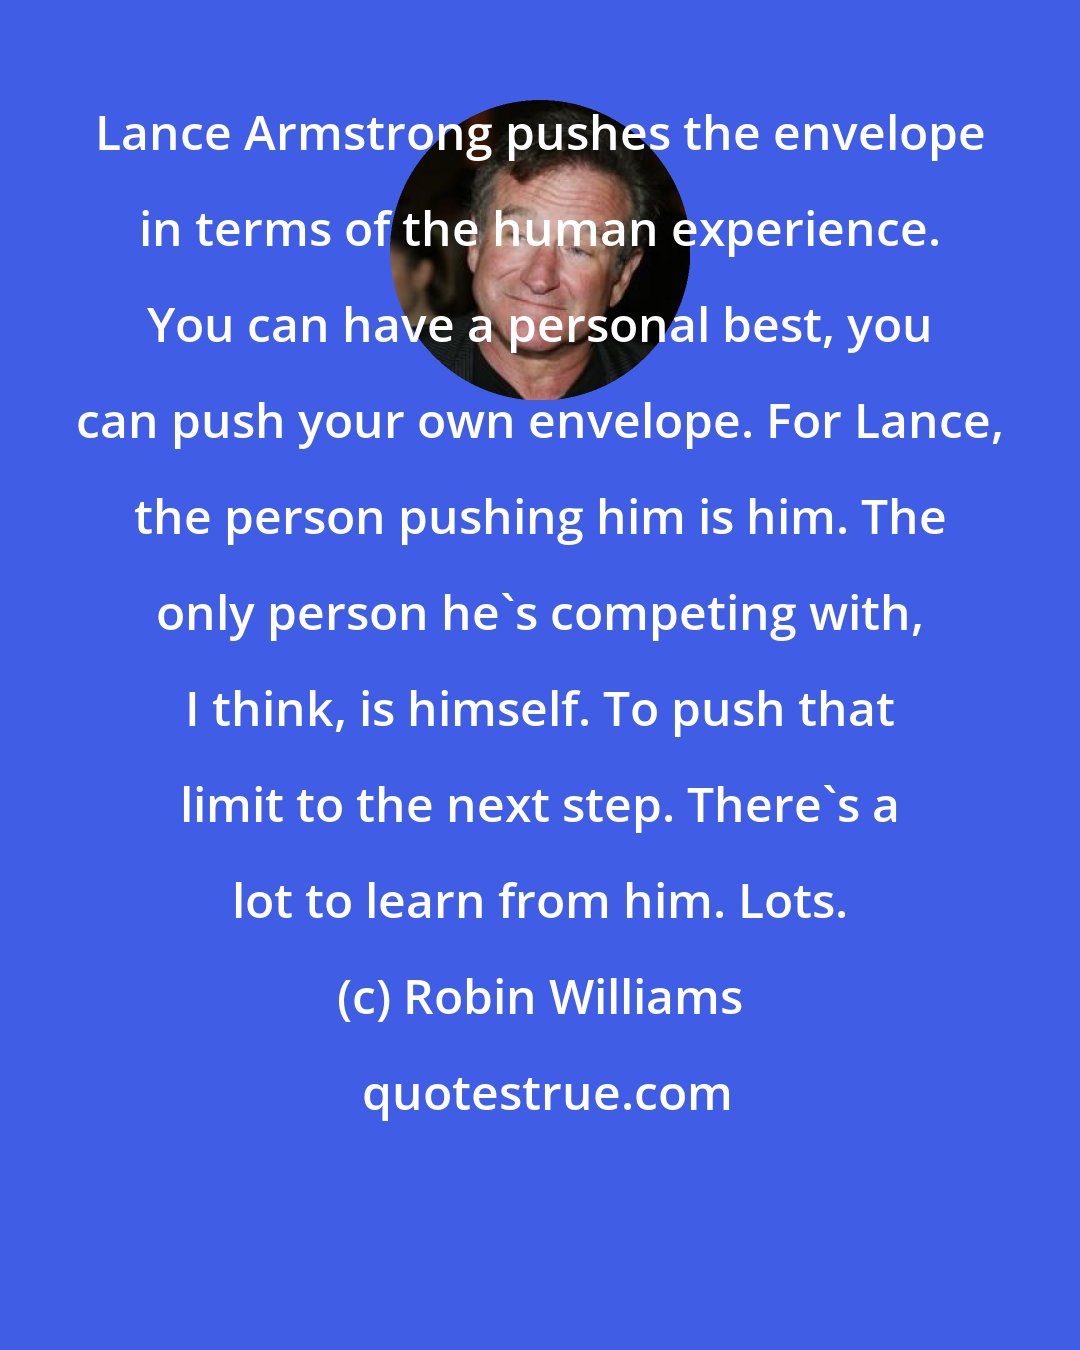 Robin Williams: Lance Armstrong pushes the envelope in terms of the human experience. You can have a personal best, you can push your own envelope. For Lance, the person pushing him is him. The only person he's competing with, I think, is himself. To push that limit to the next step. There's a lot to learn from him. Lots.